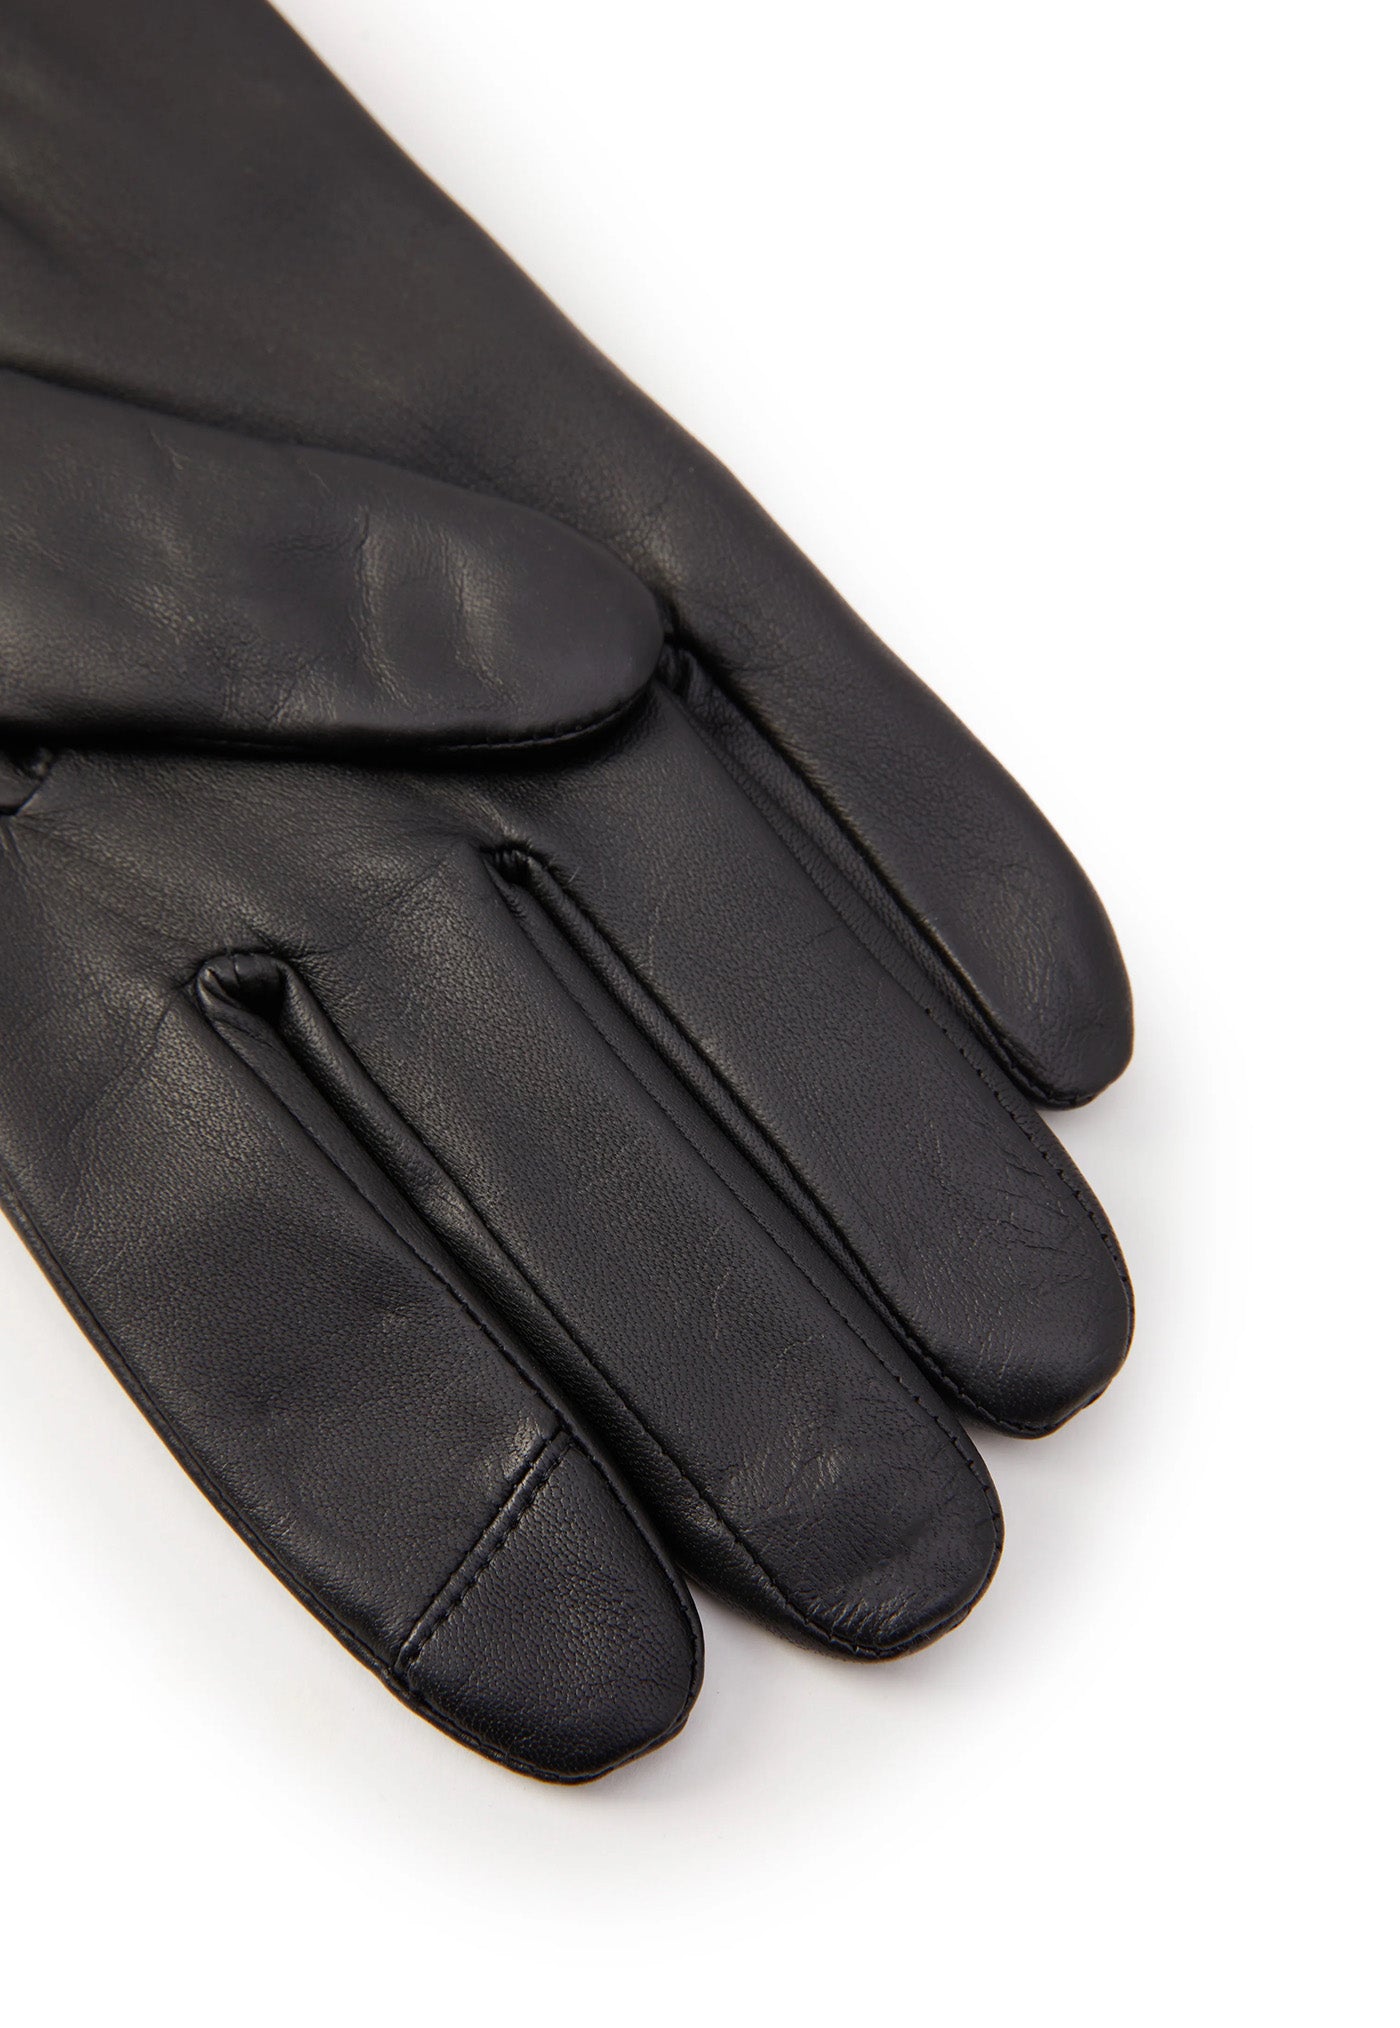 Contrast Leather Gloves - Black Tan sold by Angel Divine